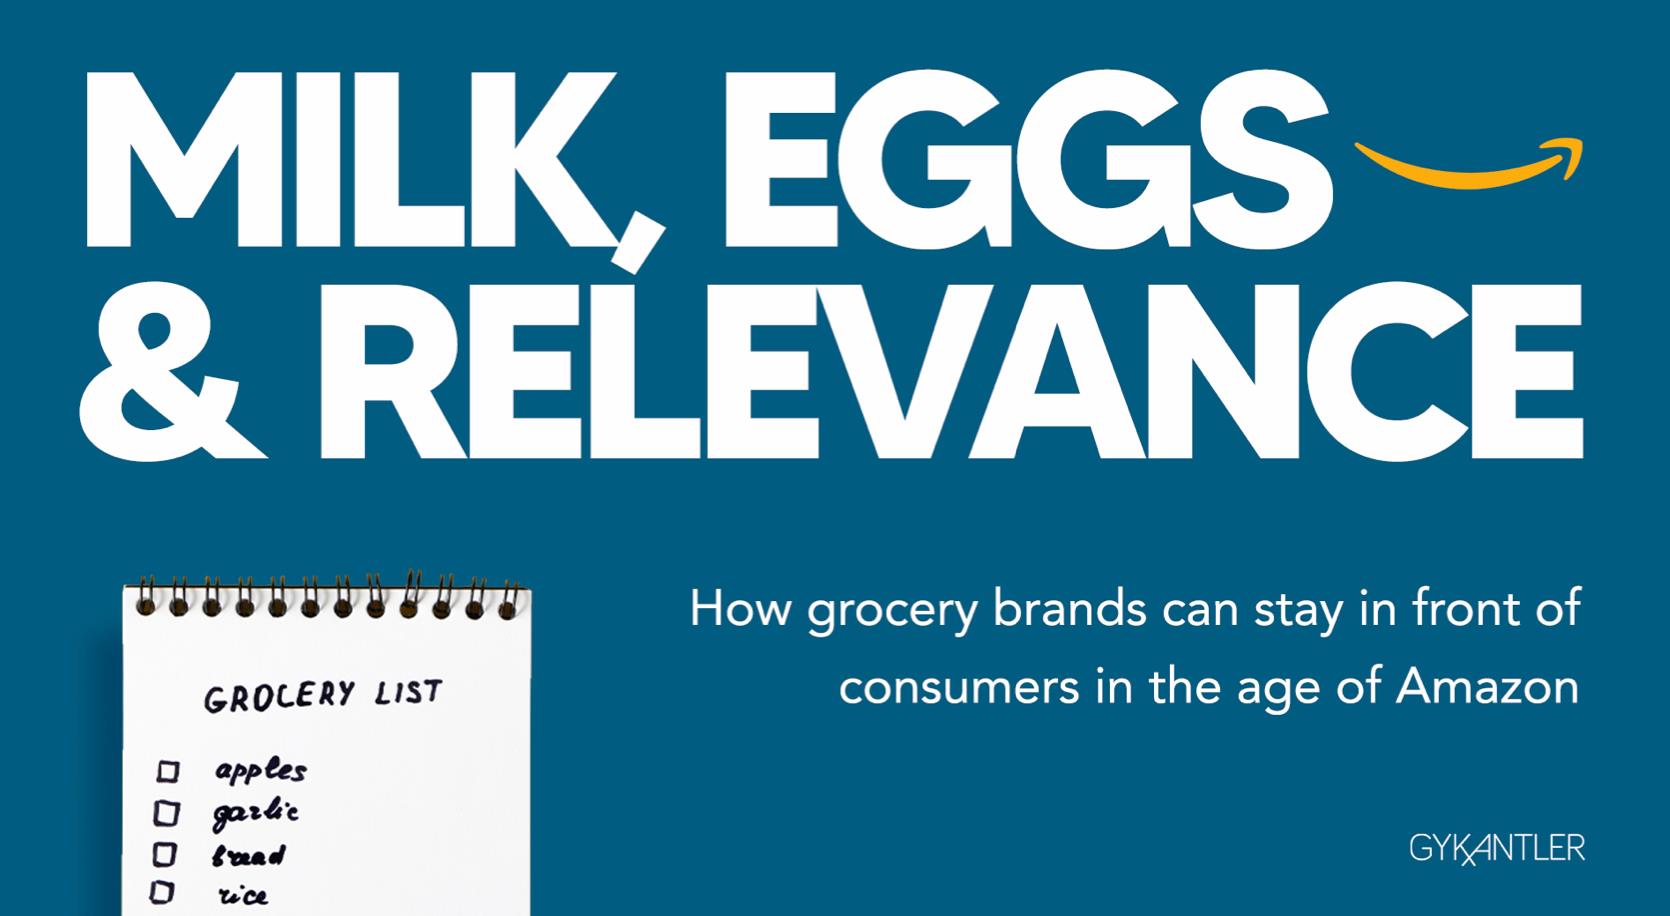 Milk, Eggs and Relevance: How grocery brands can stay in front of customers in the age of Amazon | GYK Antler